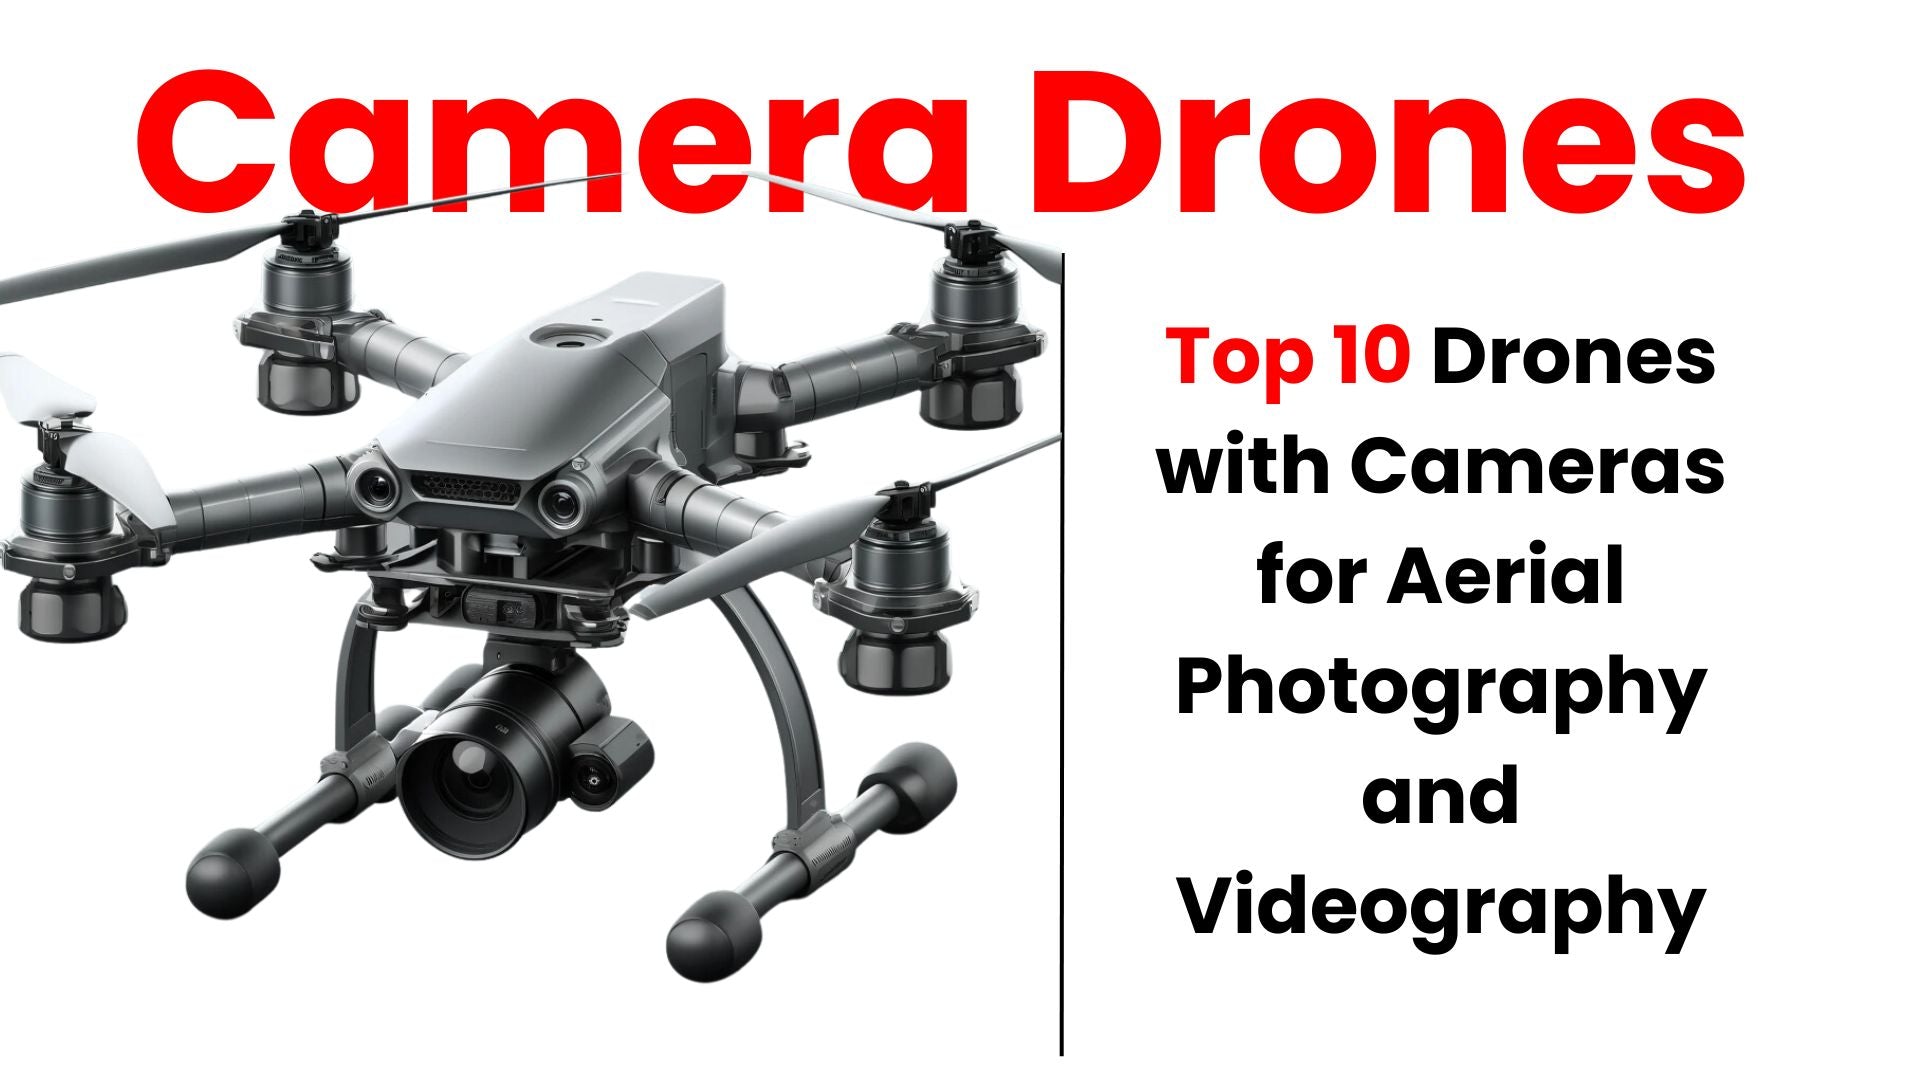 Top 10 Drones with Cameras for Aerial Photography and Videography